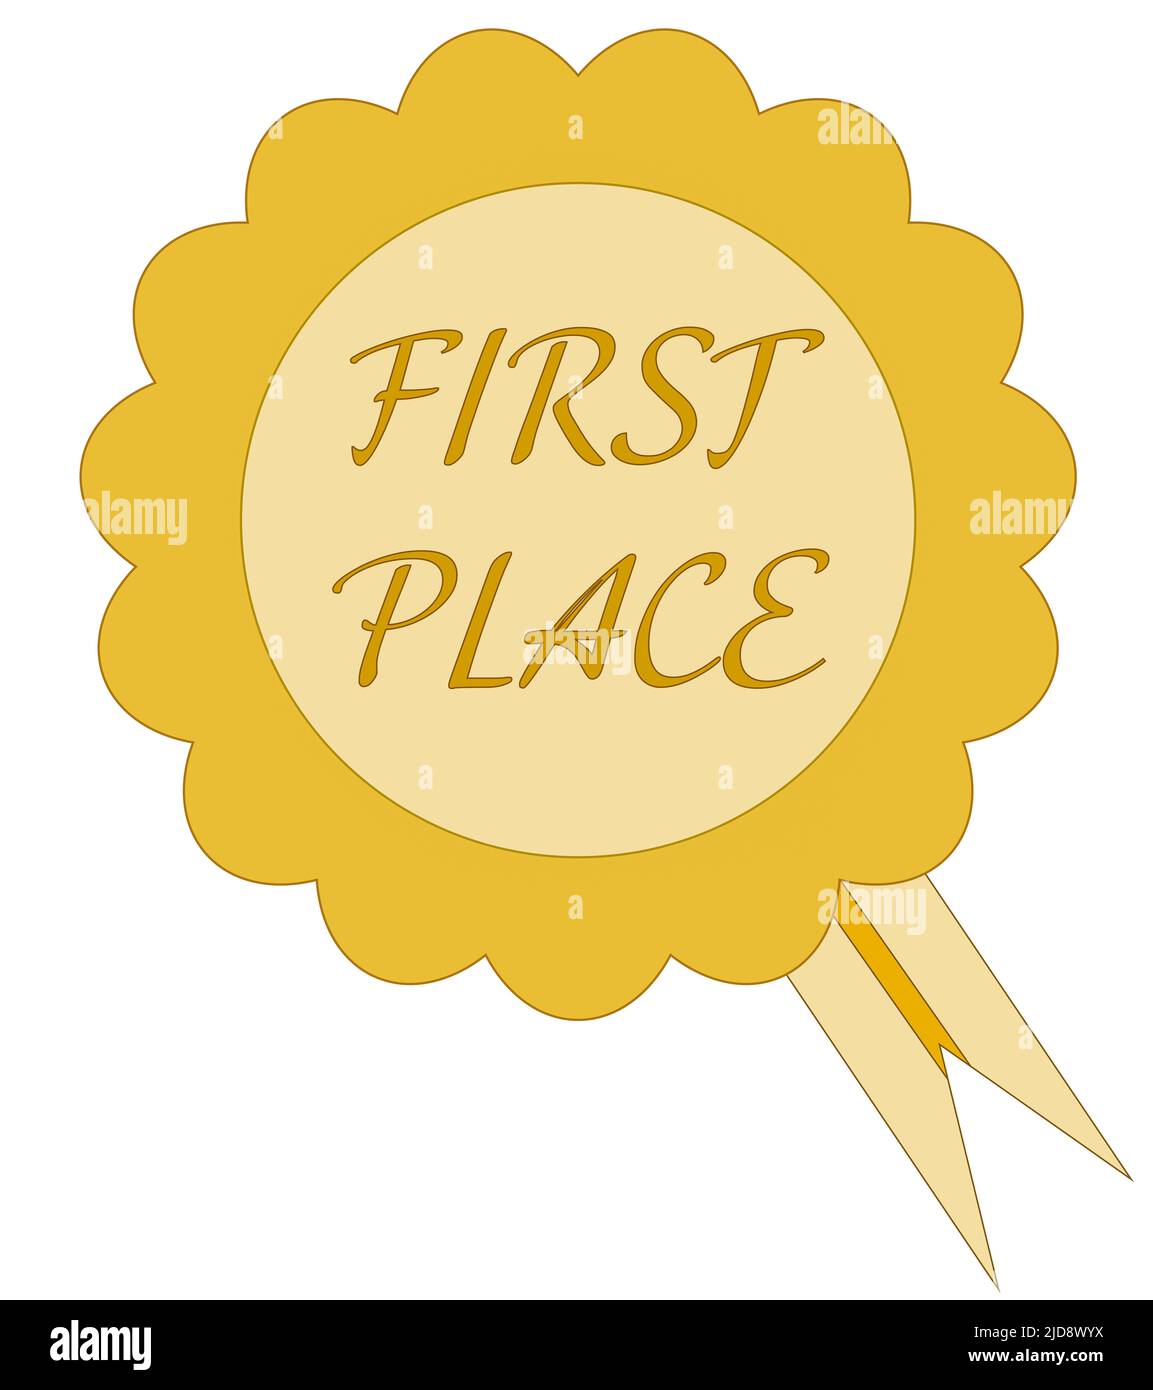 A graphic illustration of A first place rosette for use as an icon, logo or web decoration Stock Photo